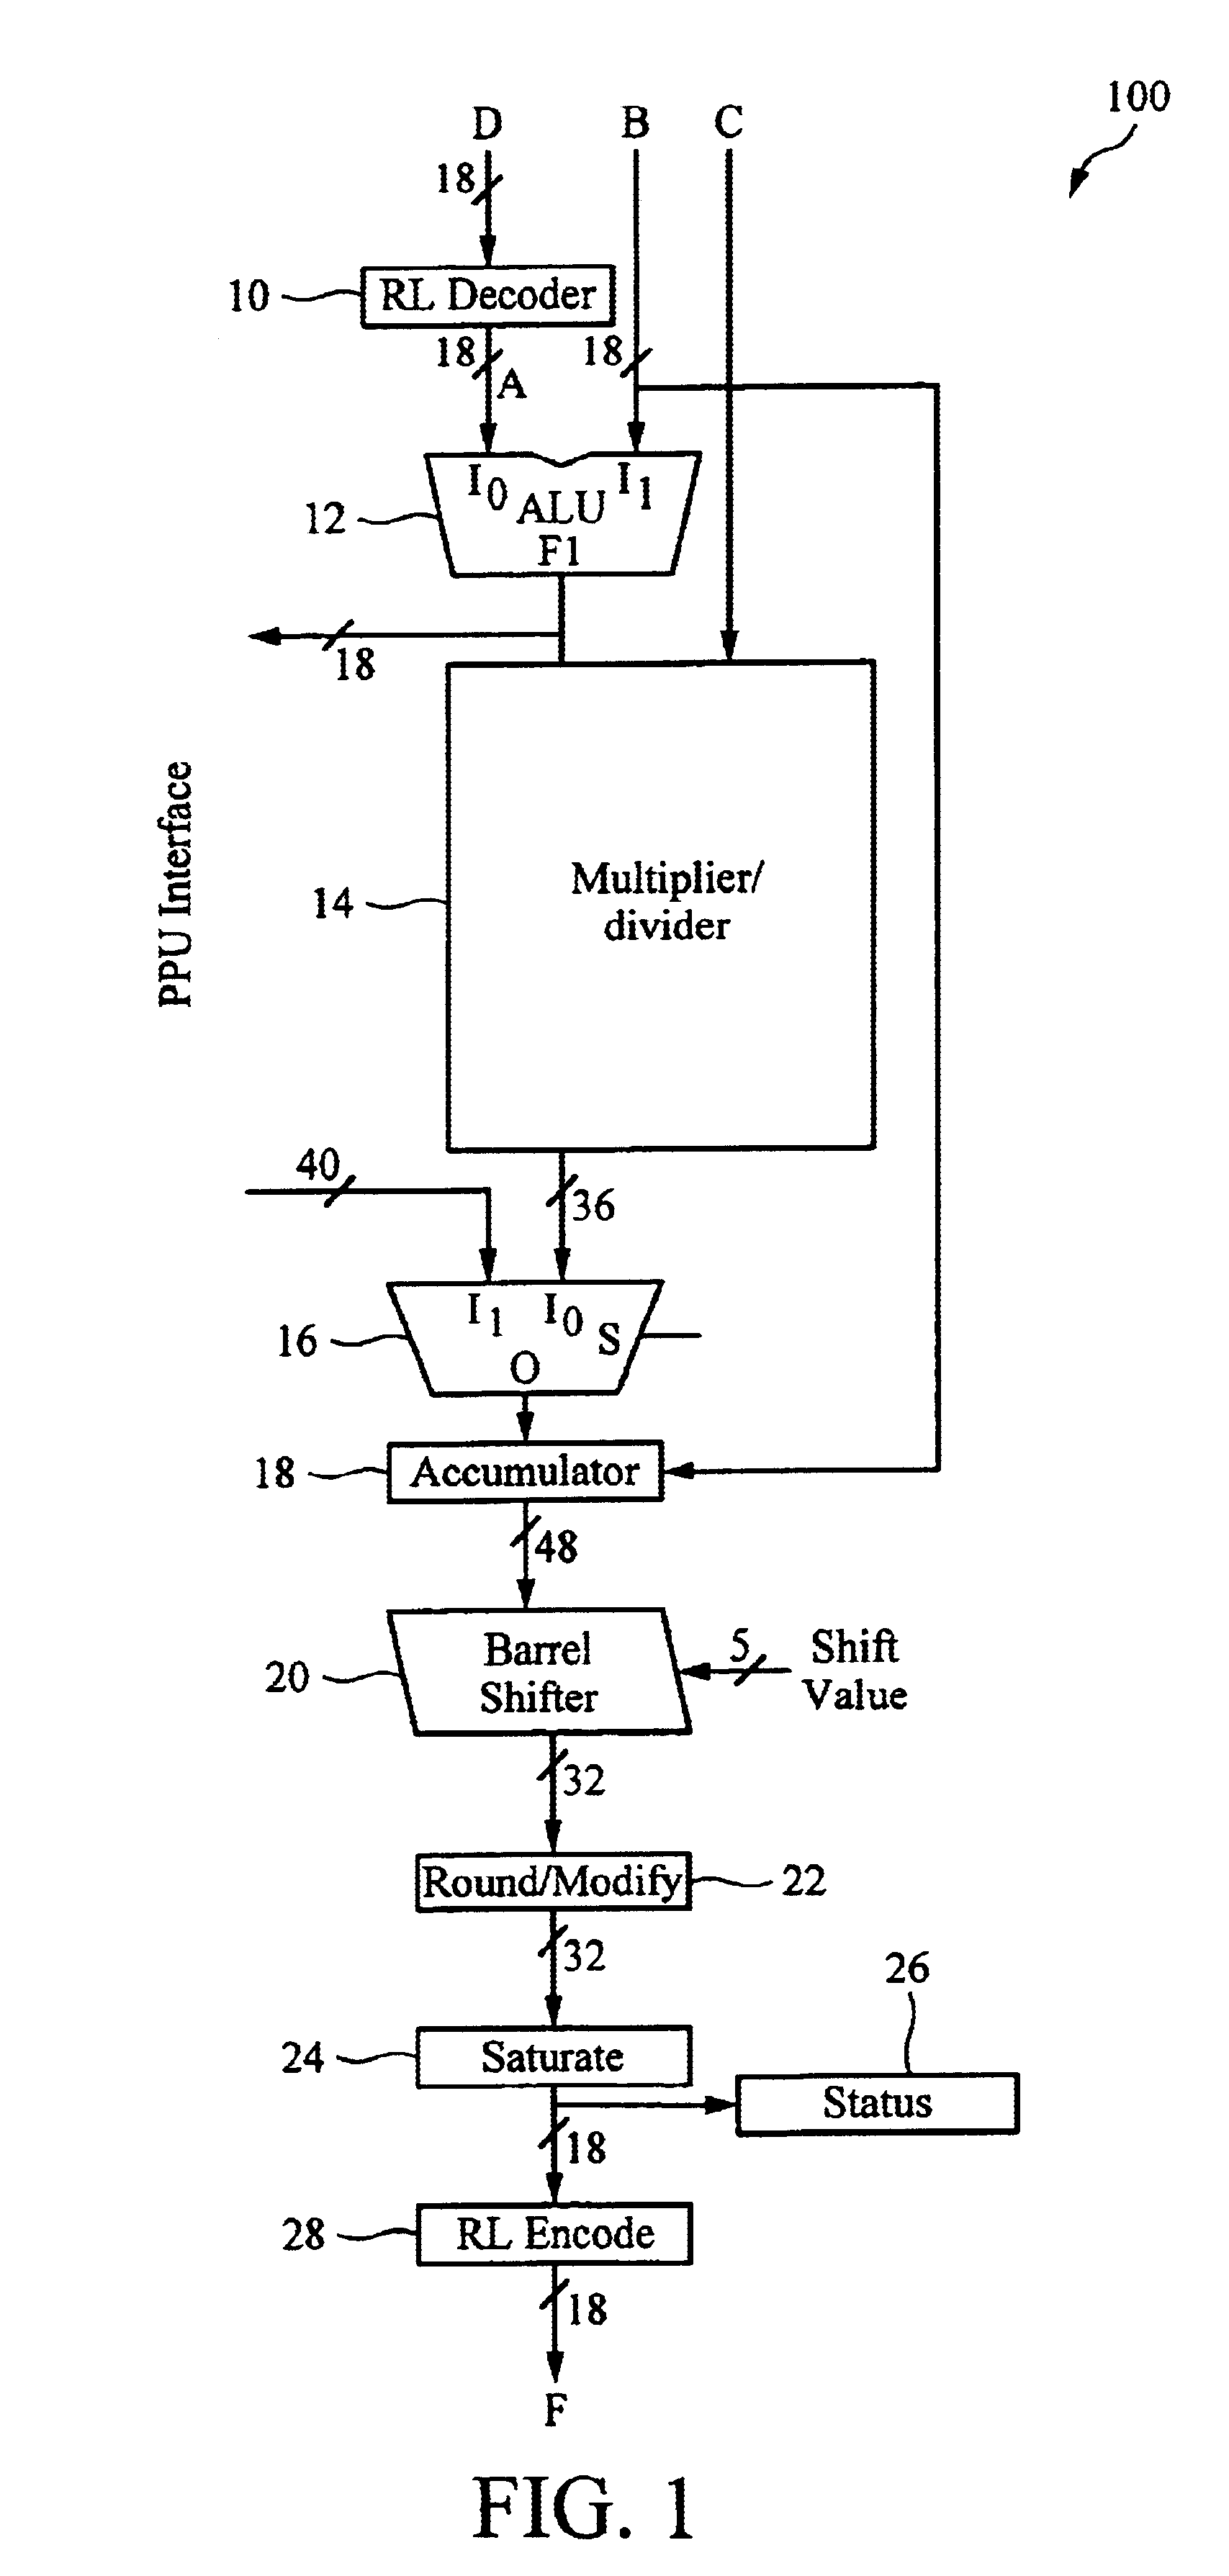 Processor architecture for compression and decompression of video and images